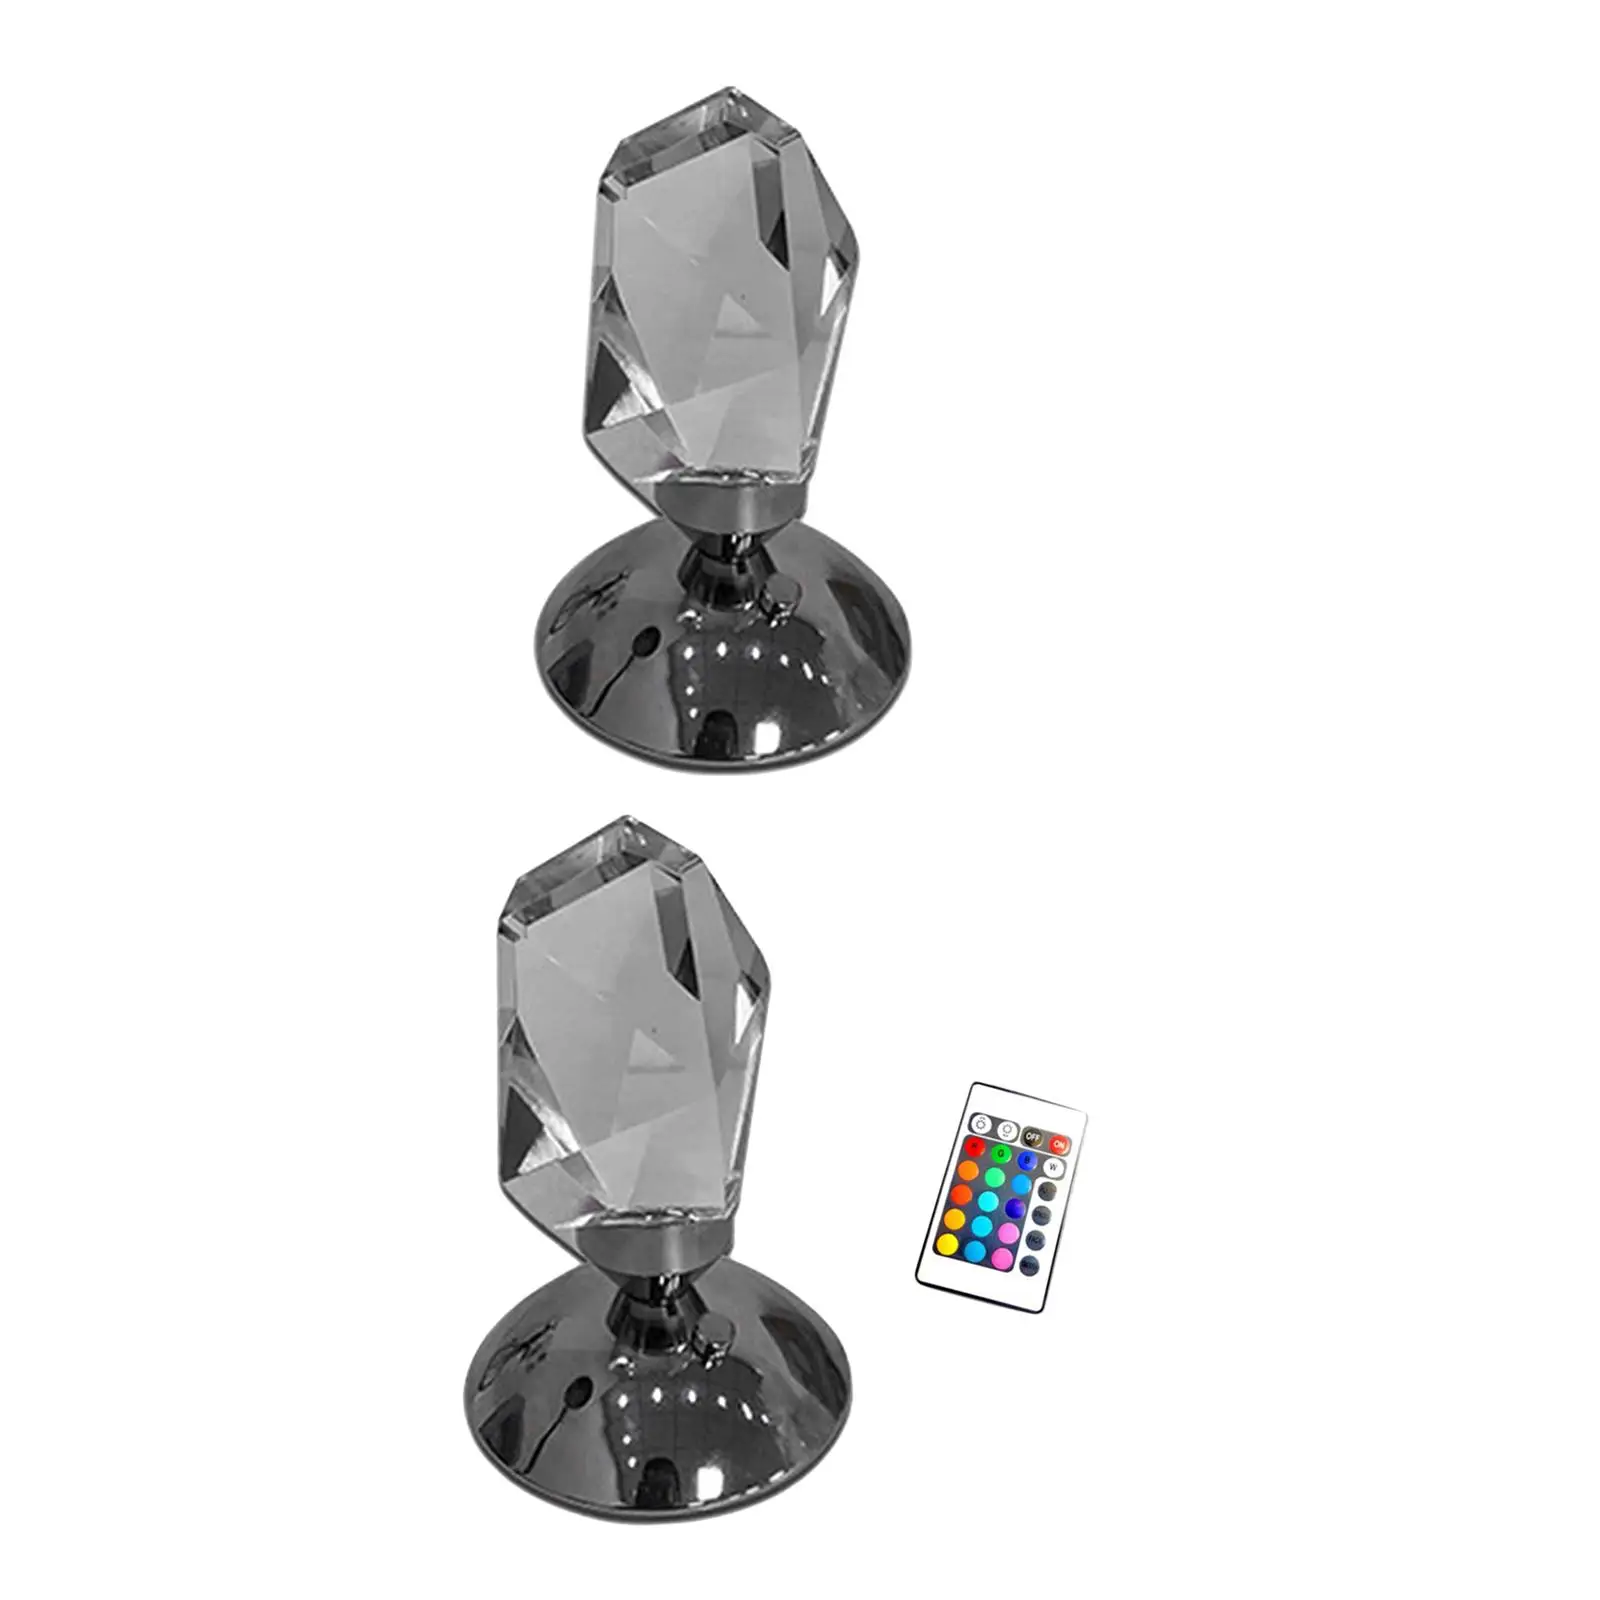 Crystal Diamond Shape Table Lamp Photo Prop Romantic LED Desk Lamp Touch Lamp 16 Colors Changing for Party Office Dresser Home